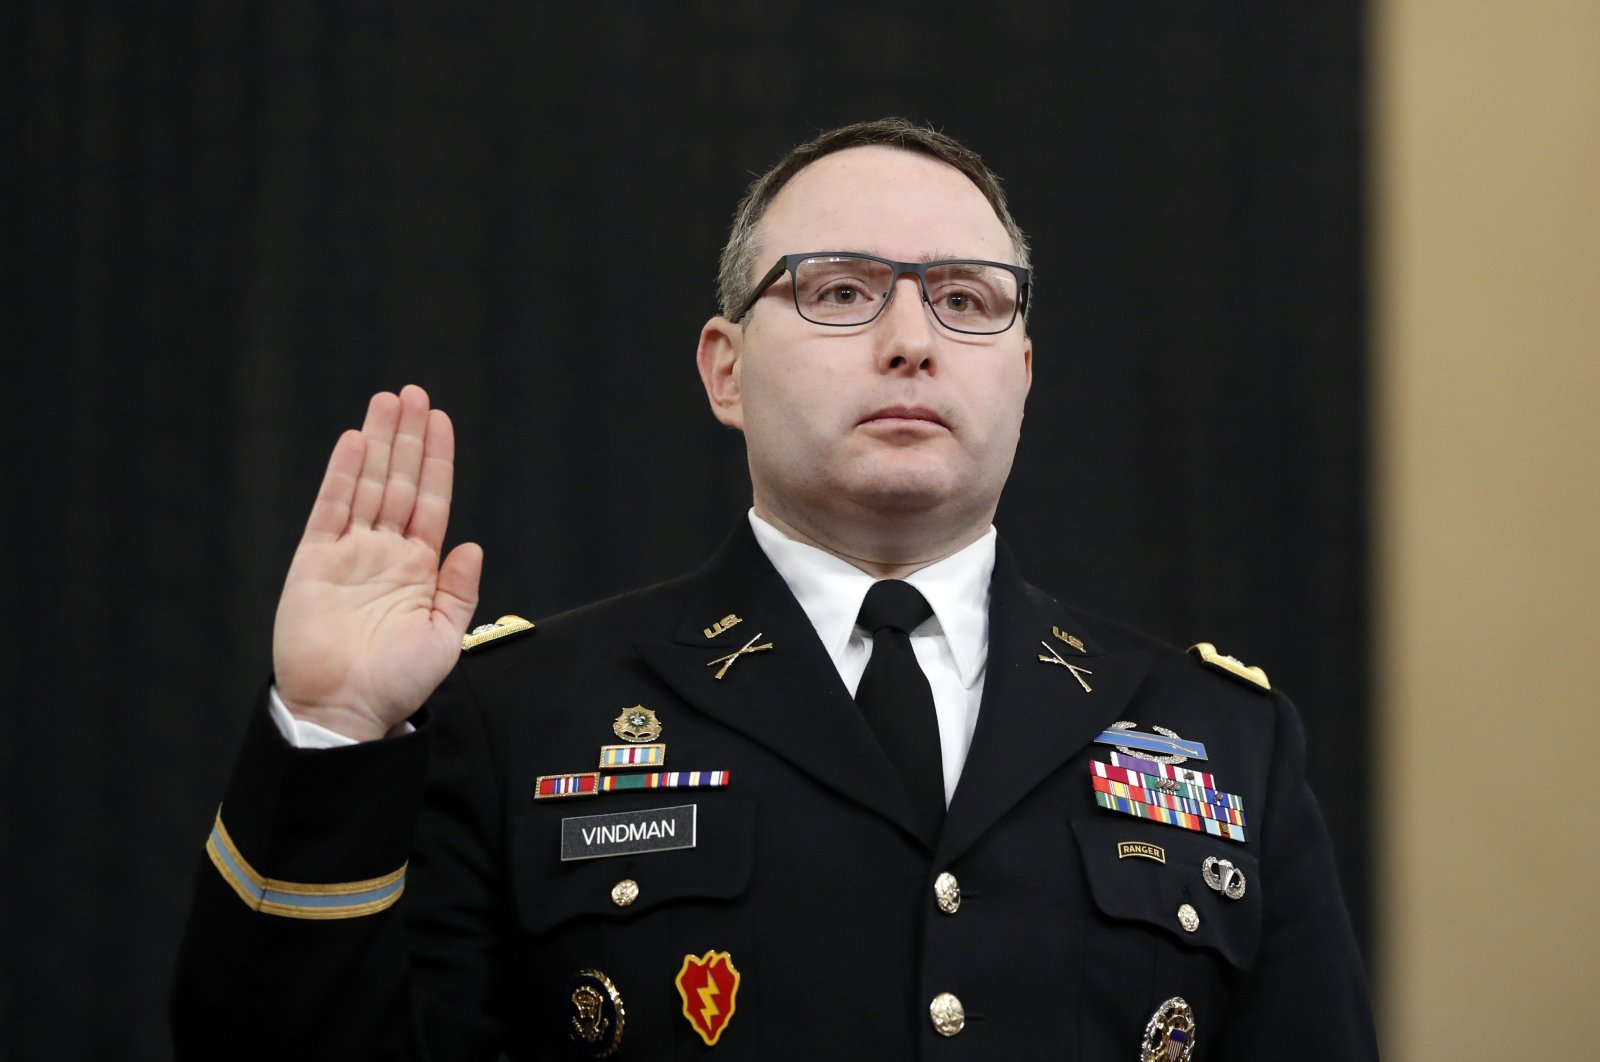 In this Nov. 19, 2019, file photo National Security Council aide Lt. Col. Alexander Vindman is sworn in to testify before the House Intelligence Committee on Capitol Hill in Washington. (AP Photo)